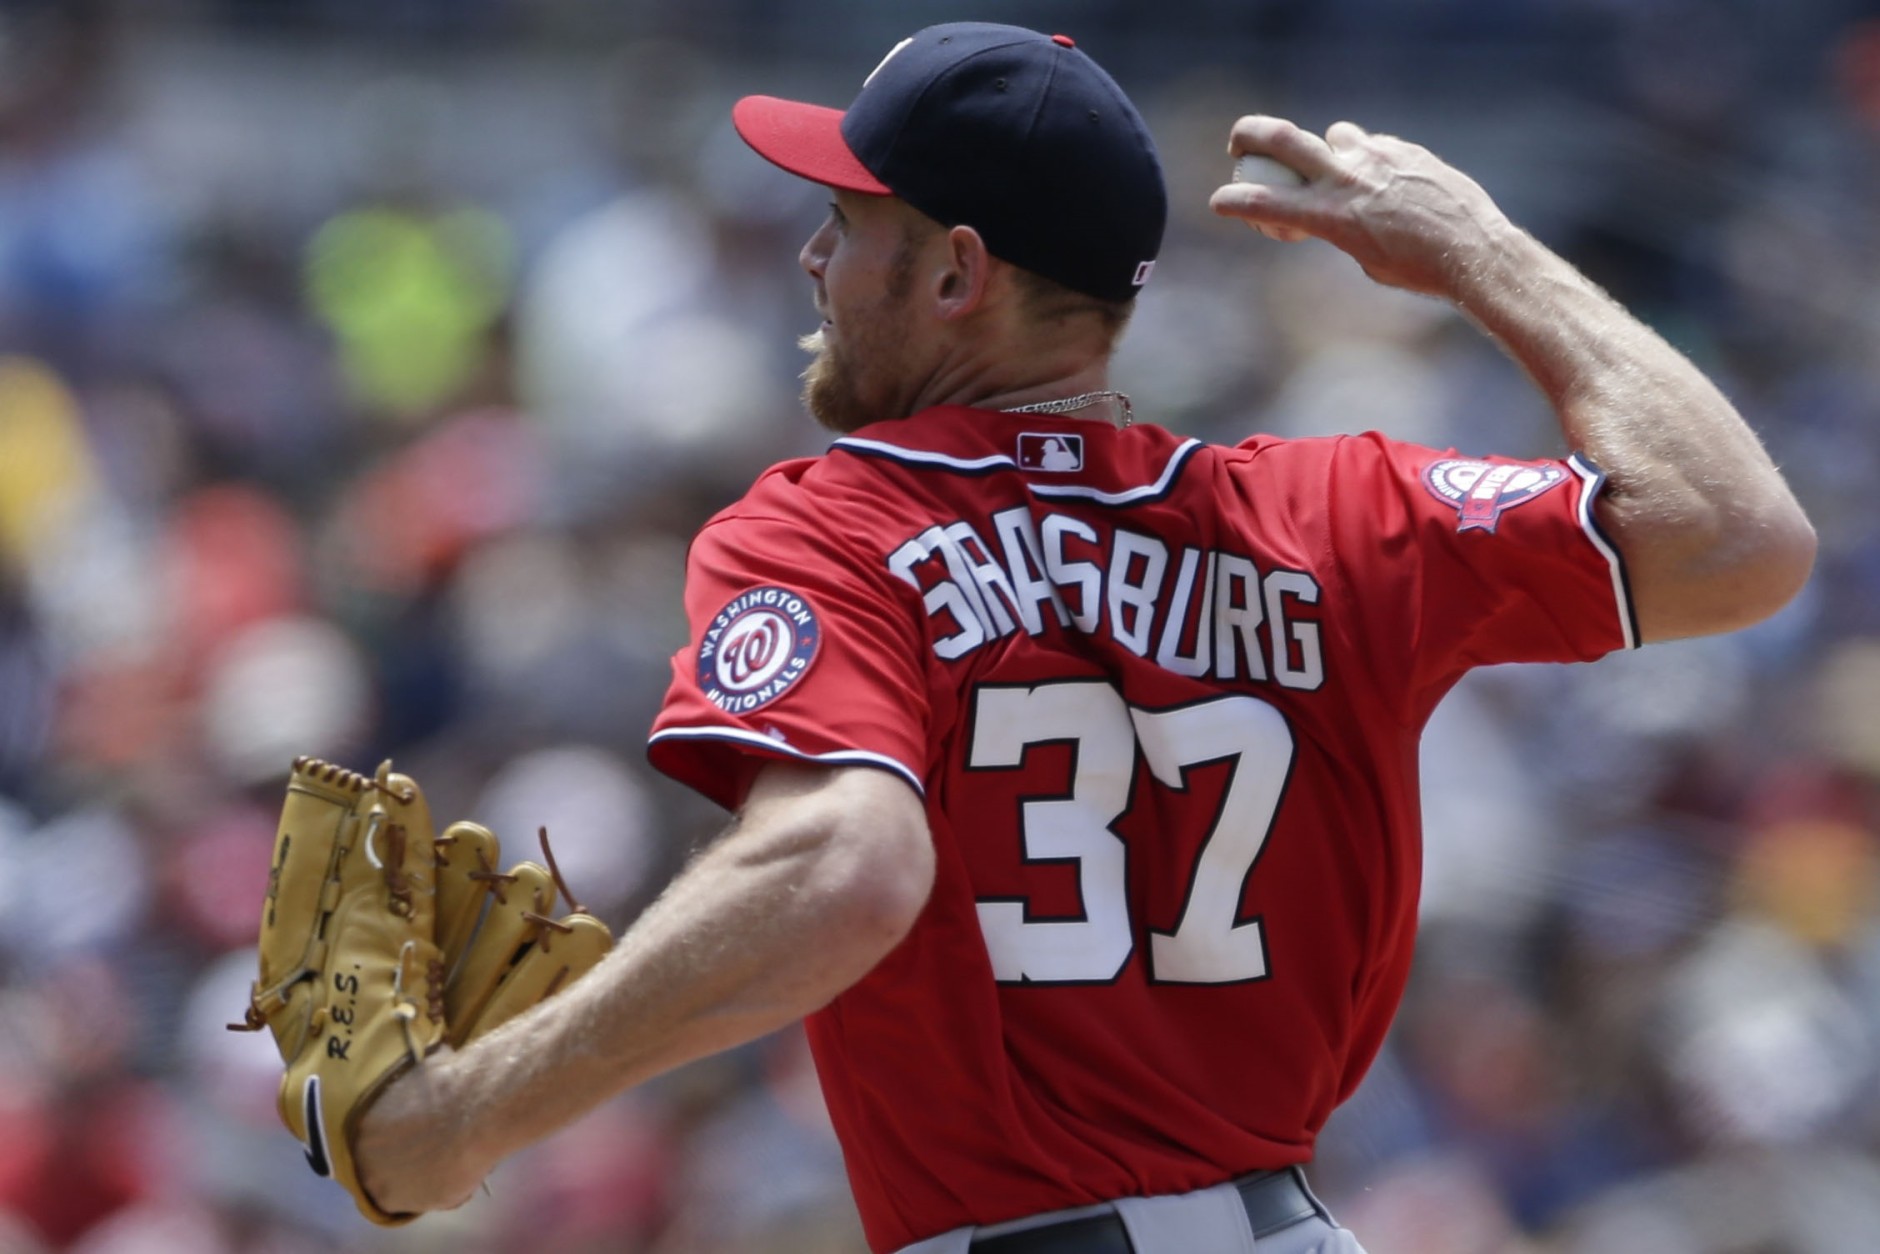 Washington Nationals starting pitcher Stephen Strasburg  throws to a San Diego Padres batter during the third inning in a baseball game Sunday, May 17, 2015, in San Diego. (AP Photo/Gregory Bull)